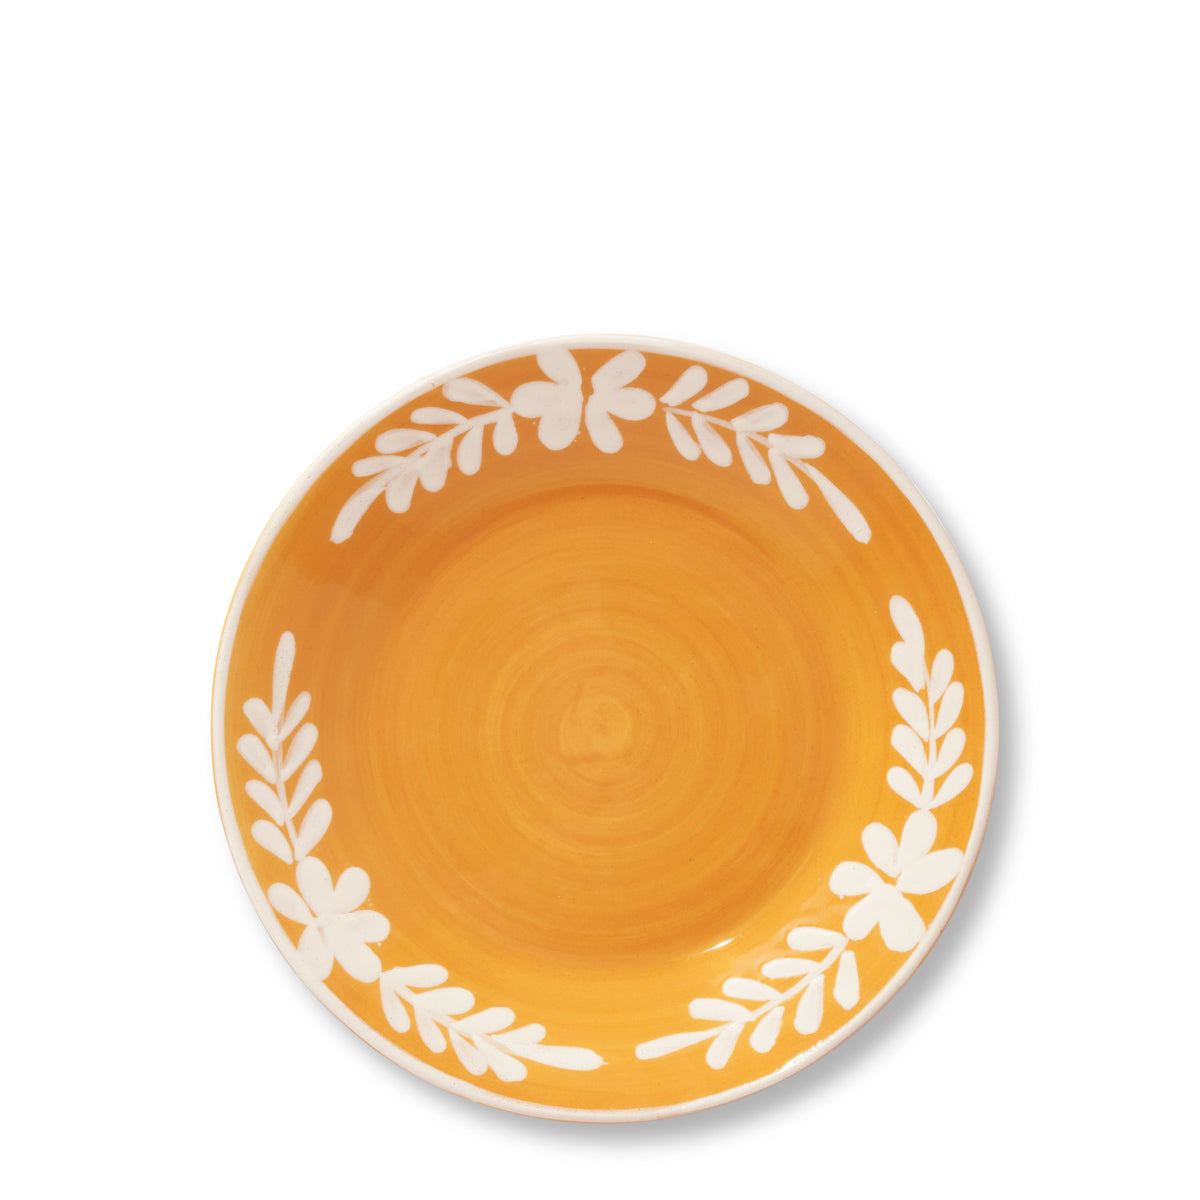 Dessert Plate With White Floral Trim in Marigold